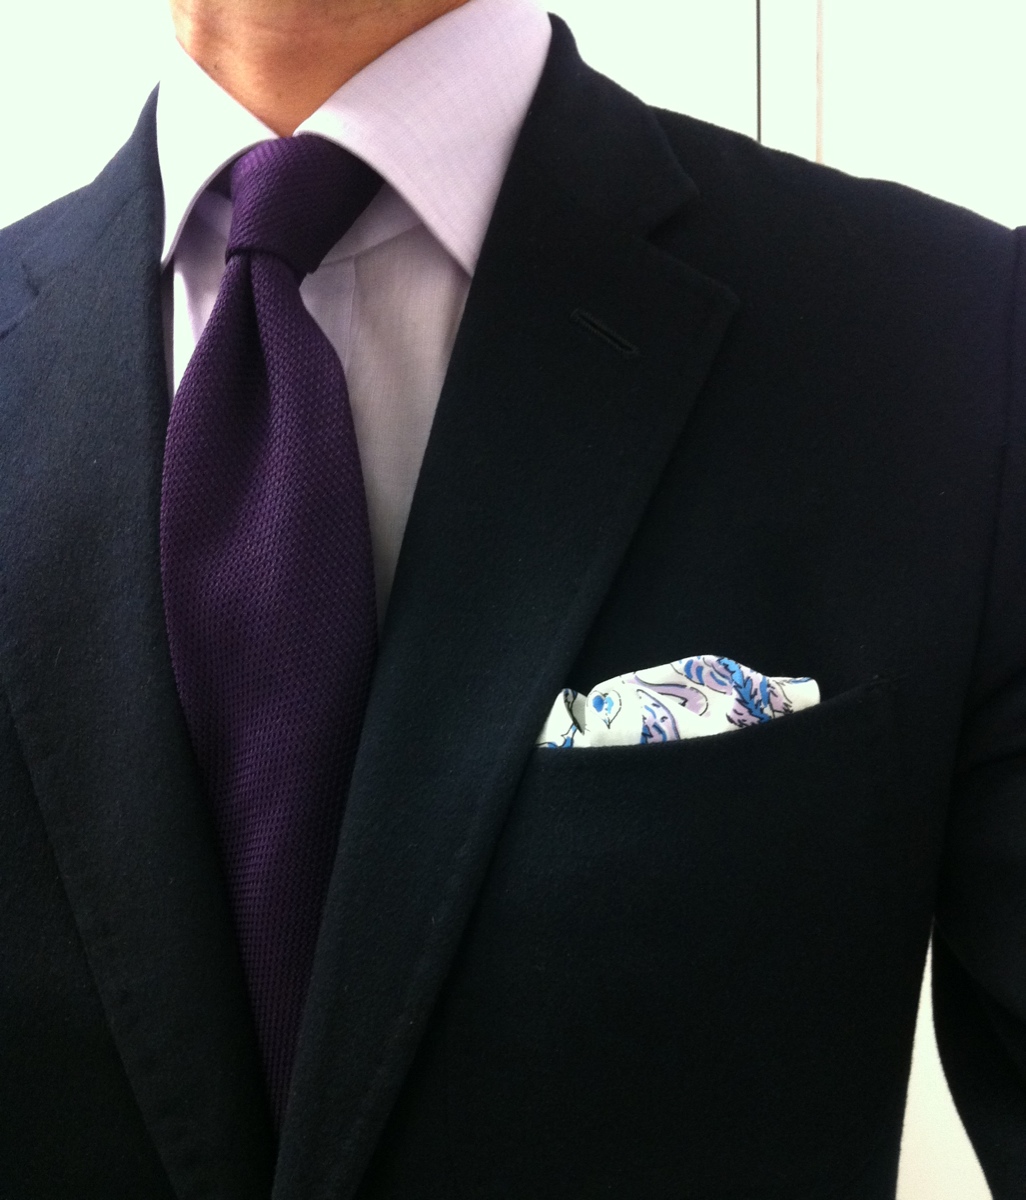 Dimple in the tie for business meetings? | Styleforum